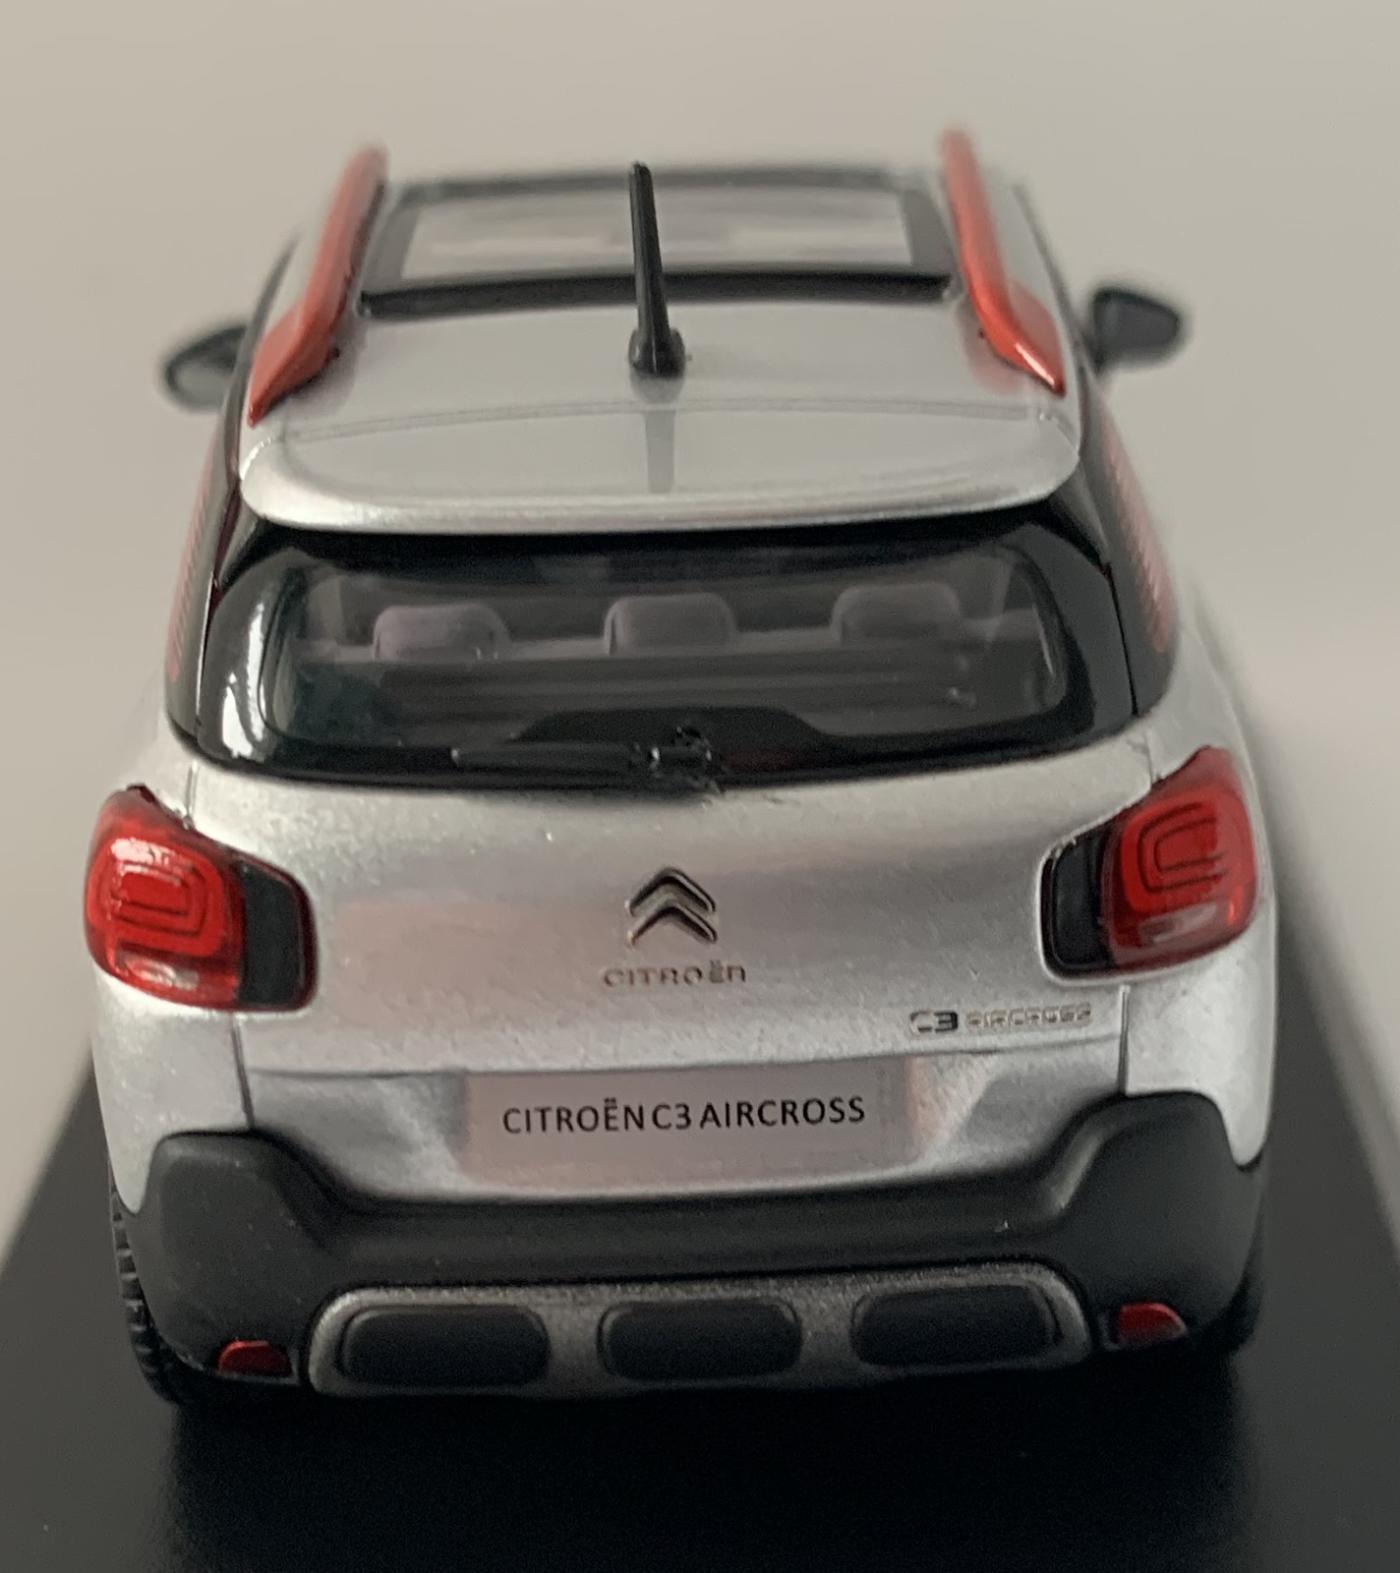 An excellent reproduction of the Citroen C3 Aircross with detail throughout, all authentically recreated. Model is mounted on a removable plinth with a removable hard plastic cover